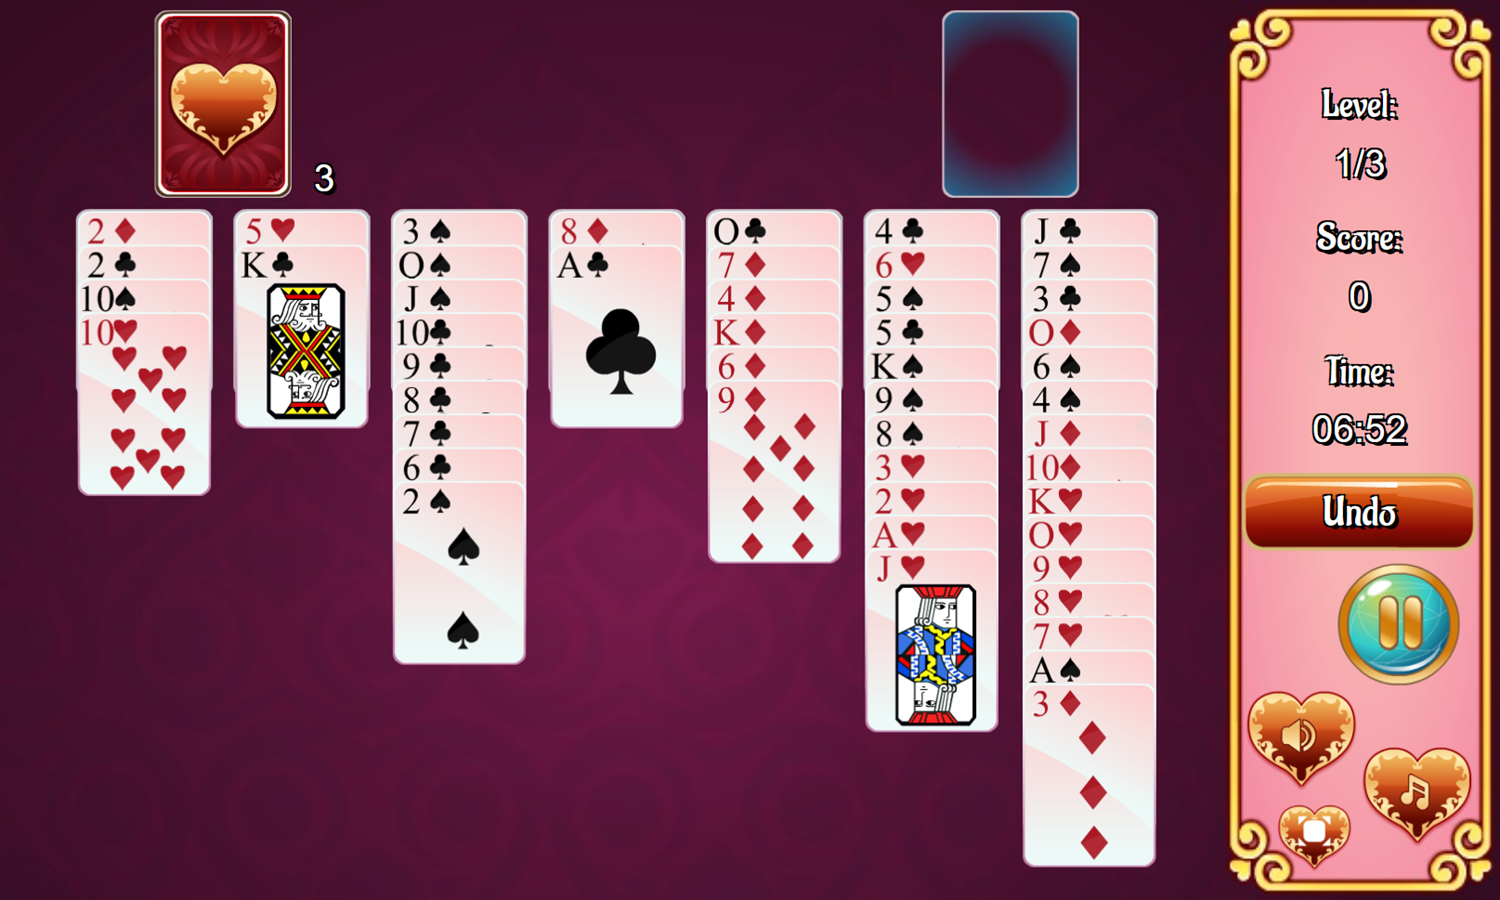 Ace of Hearts Game Play Screenshot.